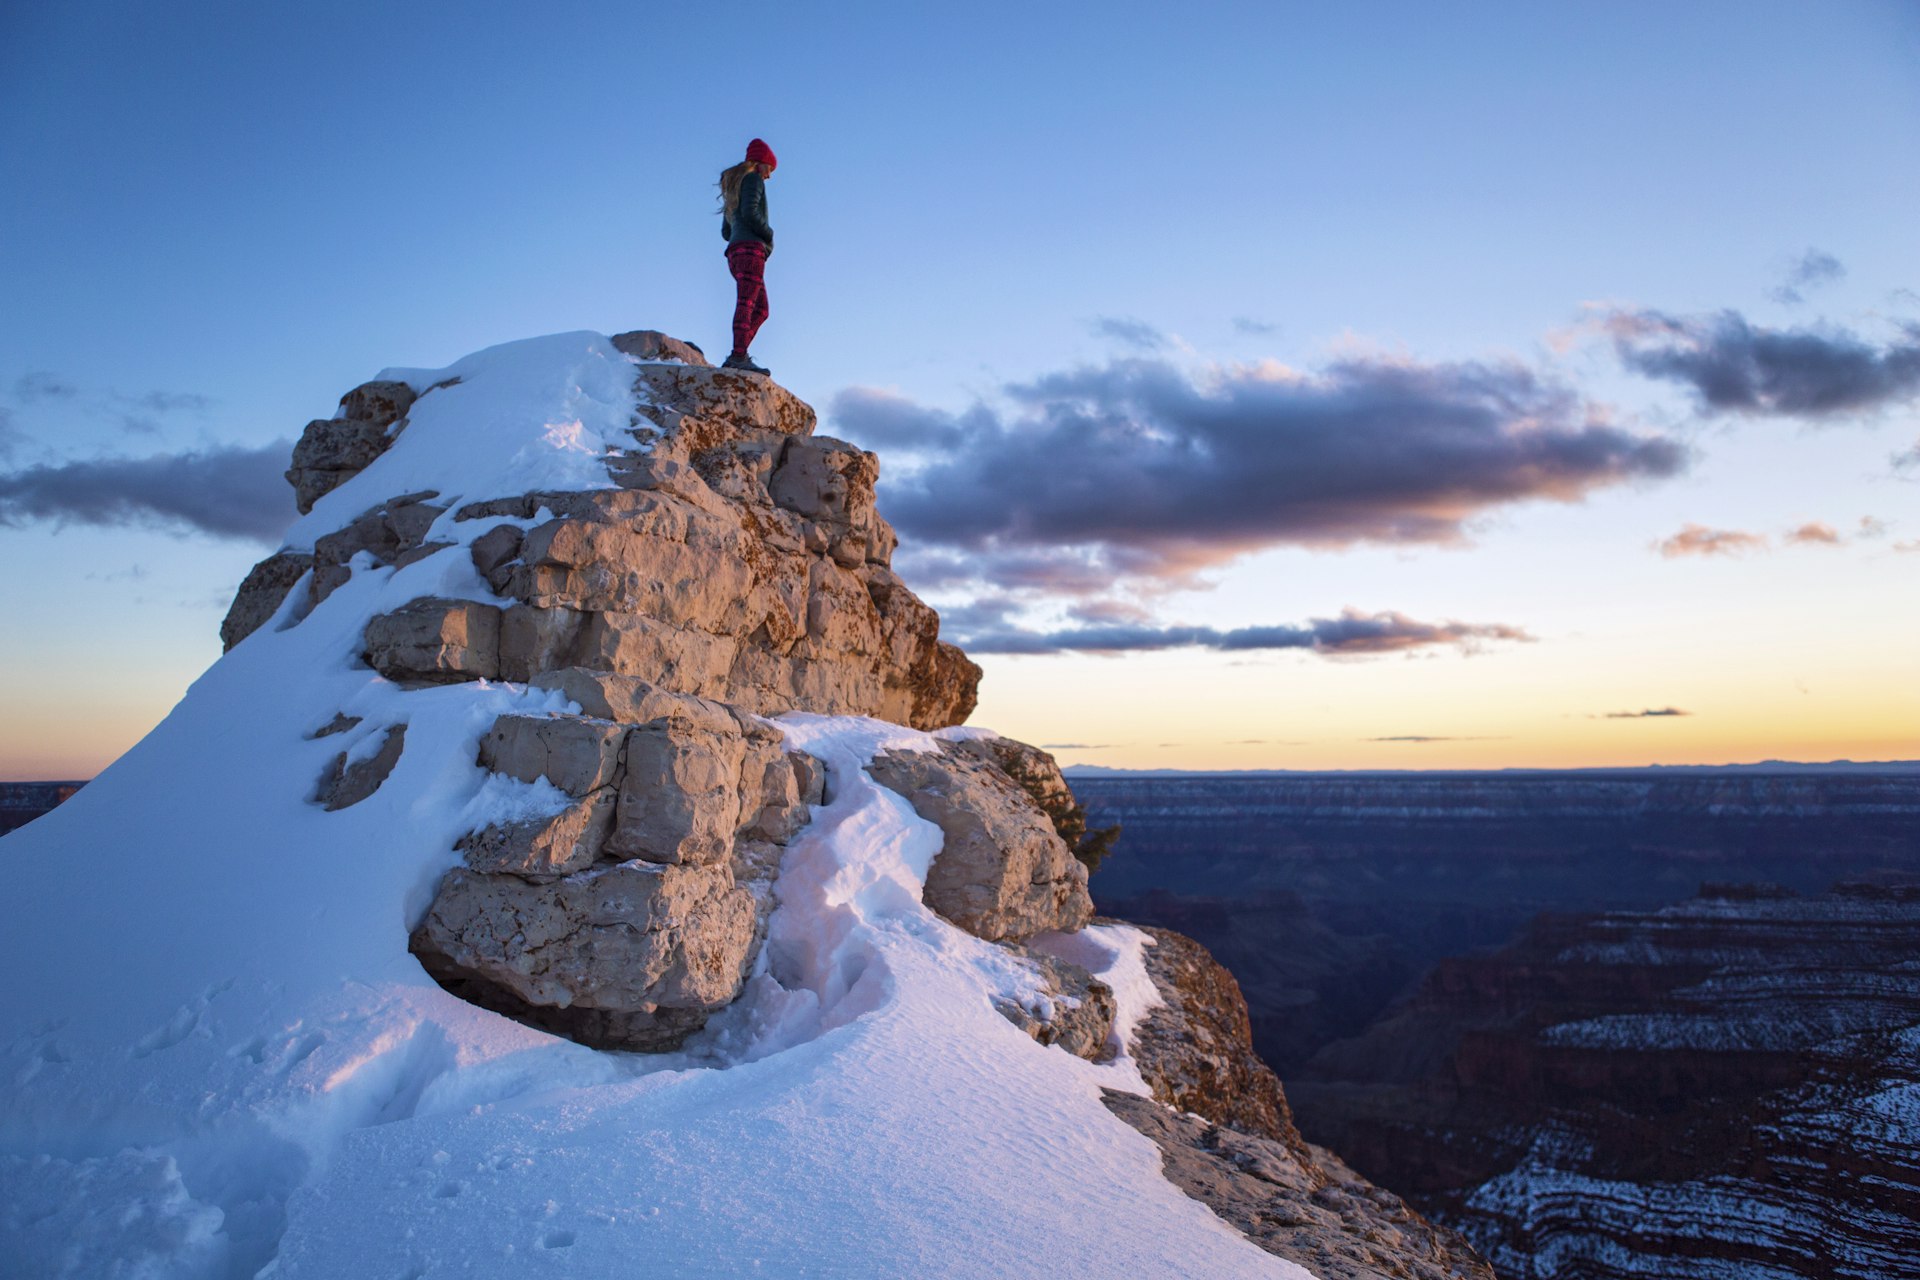 A female hiker stands atop a snow-covered rocky high point while bathed in the colors of sunset at the North Rim of the Grand Canyon.